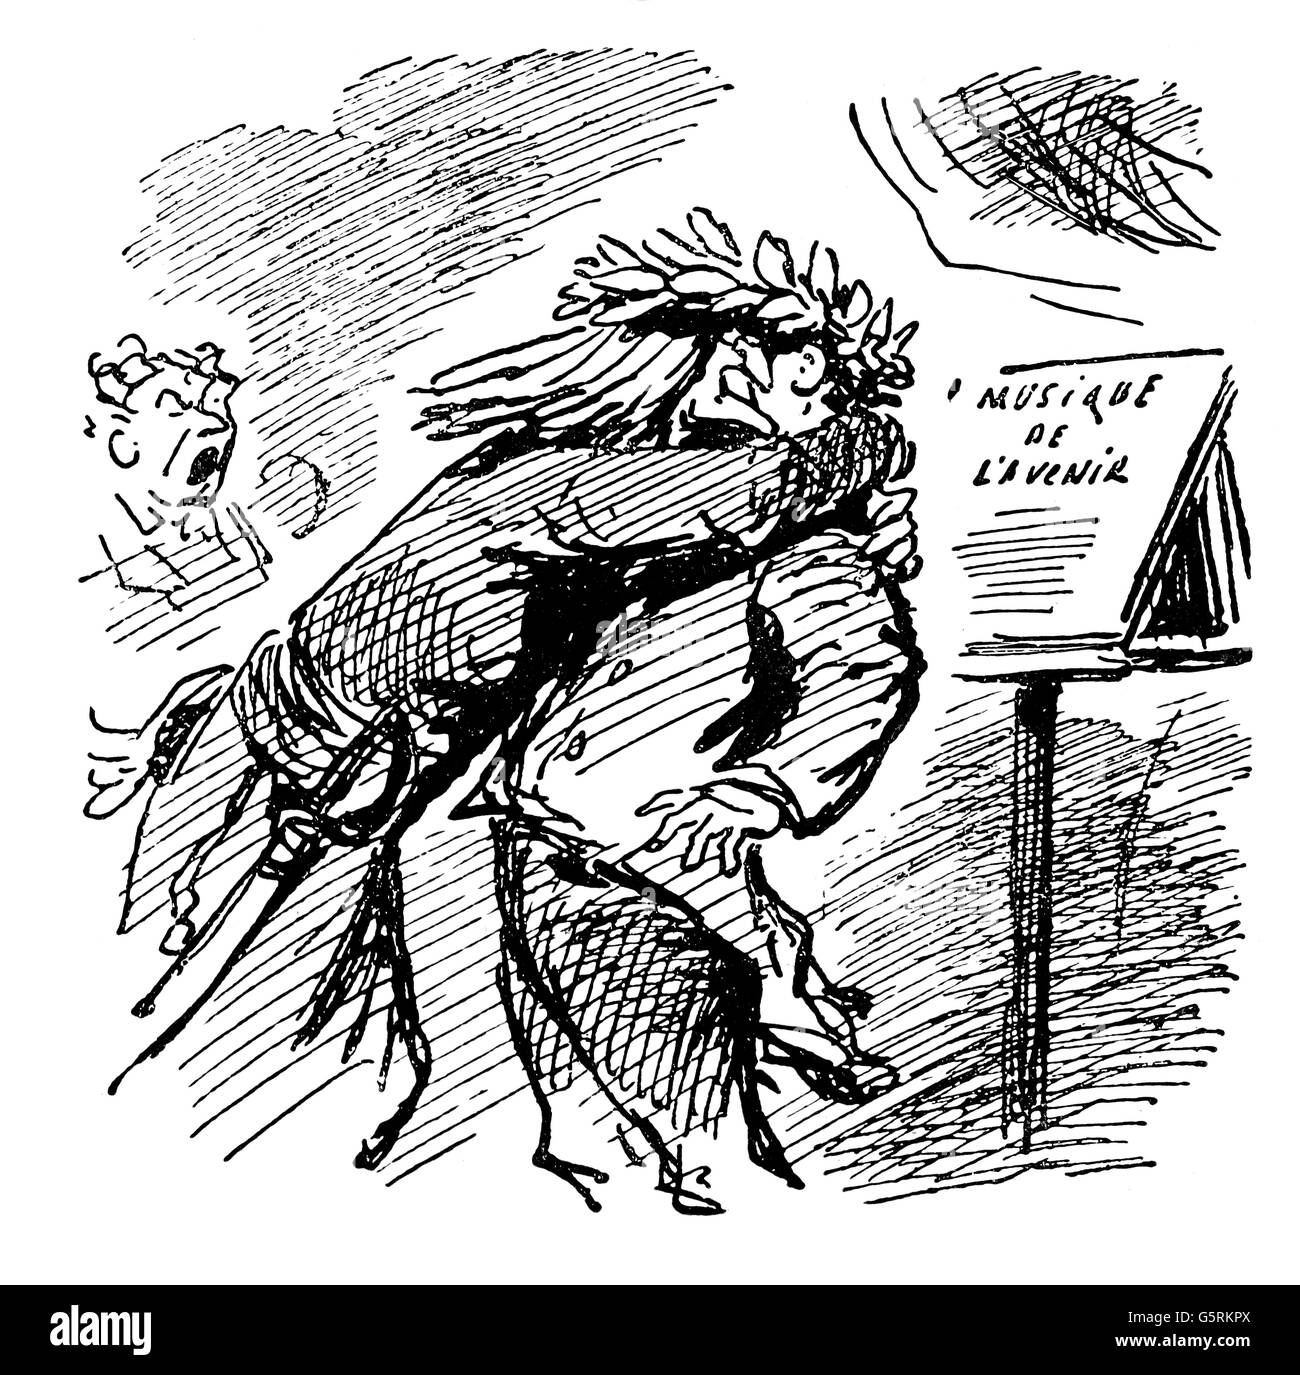 Wagner, Richard, 22.5.1813 - 13.2.1883, German composer, Franz Liszt embracing Richard Wagner, caricature, by Cham, from 'Le Charivari', lithograph, Paris, 1876, from Karl Eugen Schmidt, Richard Wagner in French caricature, Stock Photo